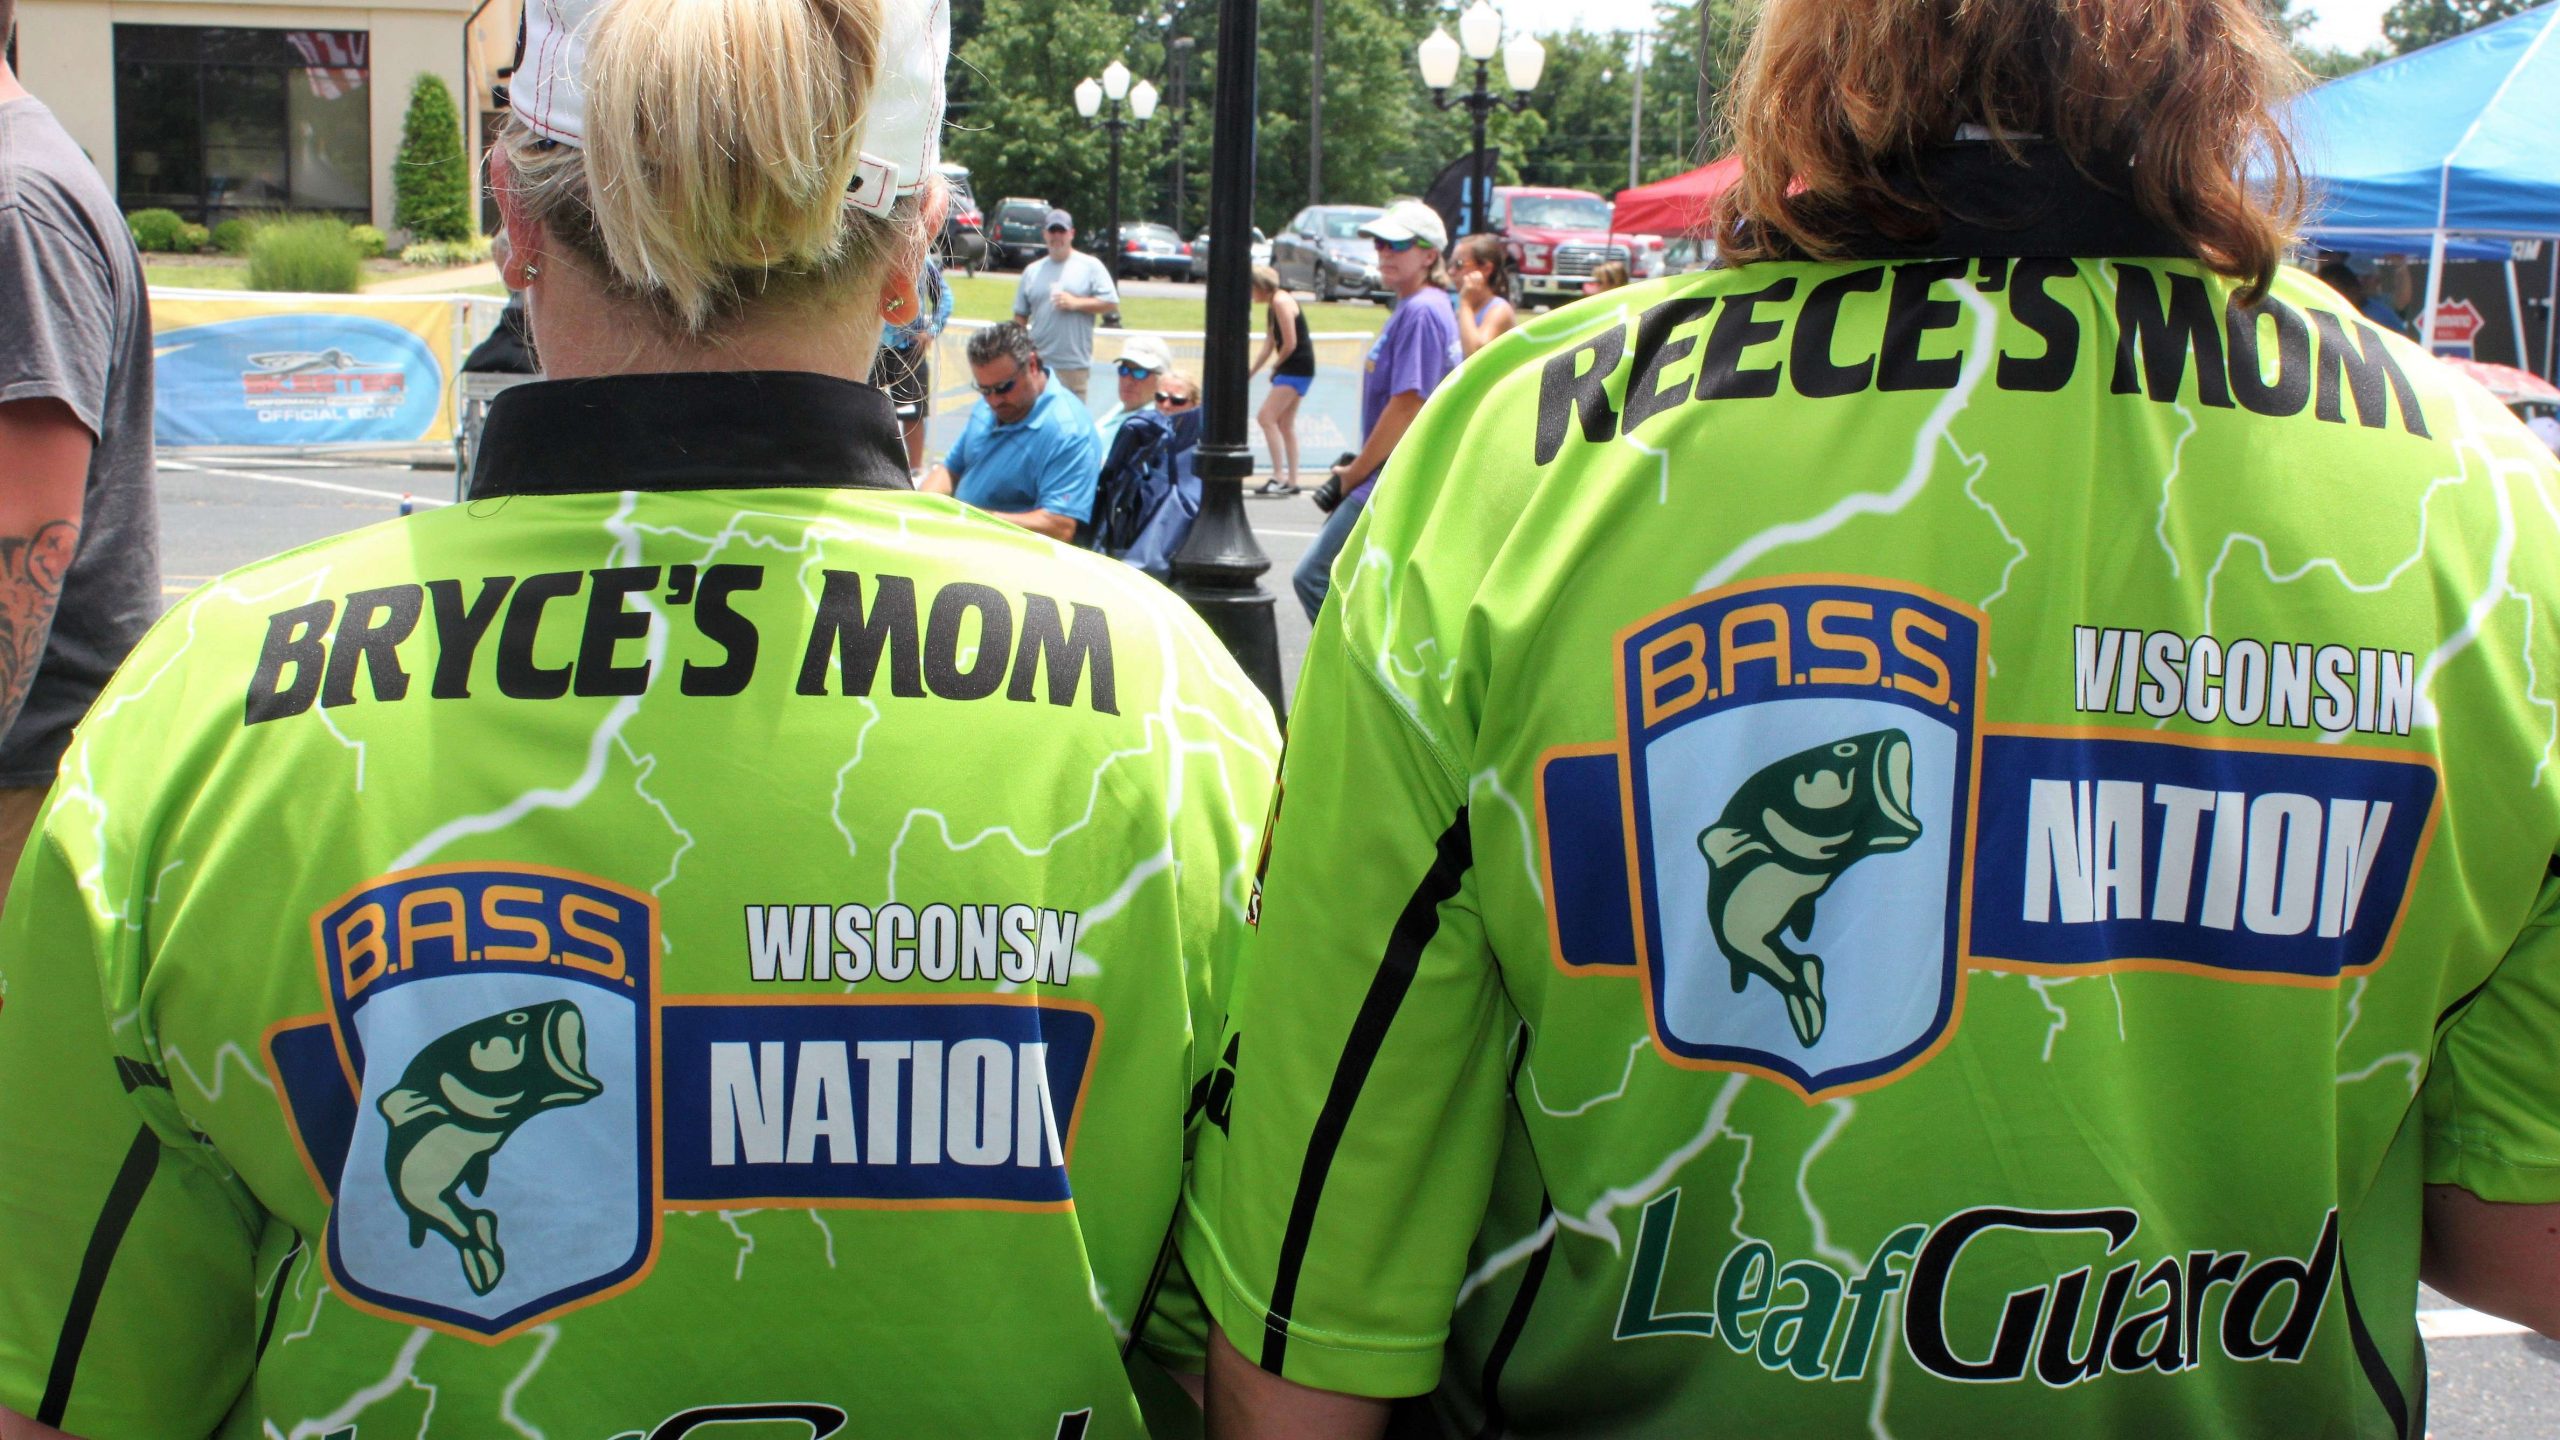 And you absolutely canât have a tournament without the fans â especially the parents. Here are a pair of proud momâs whoâs shirt backs say it all.
